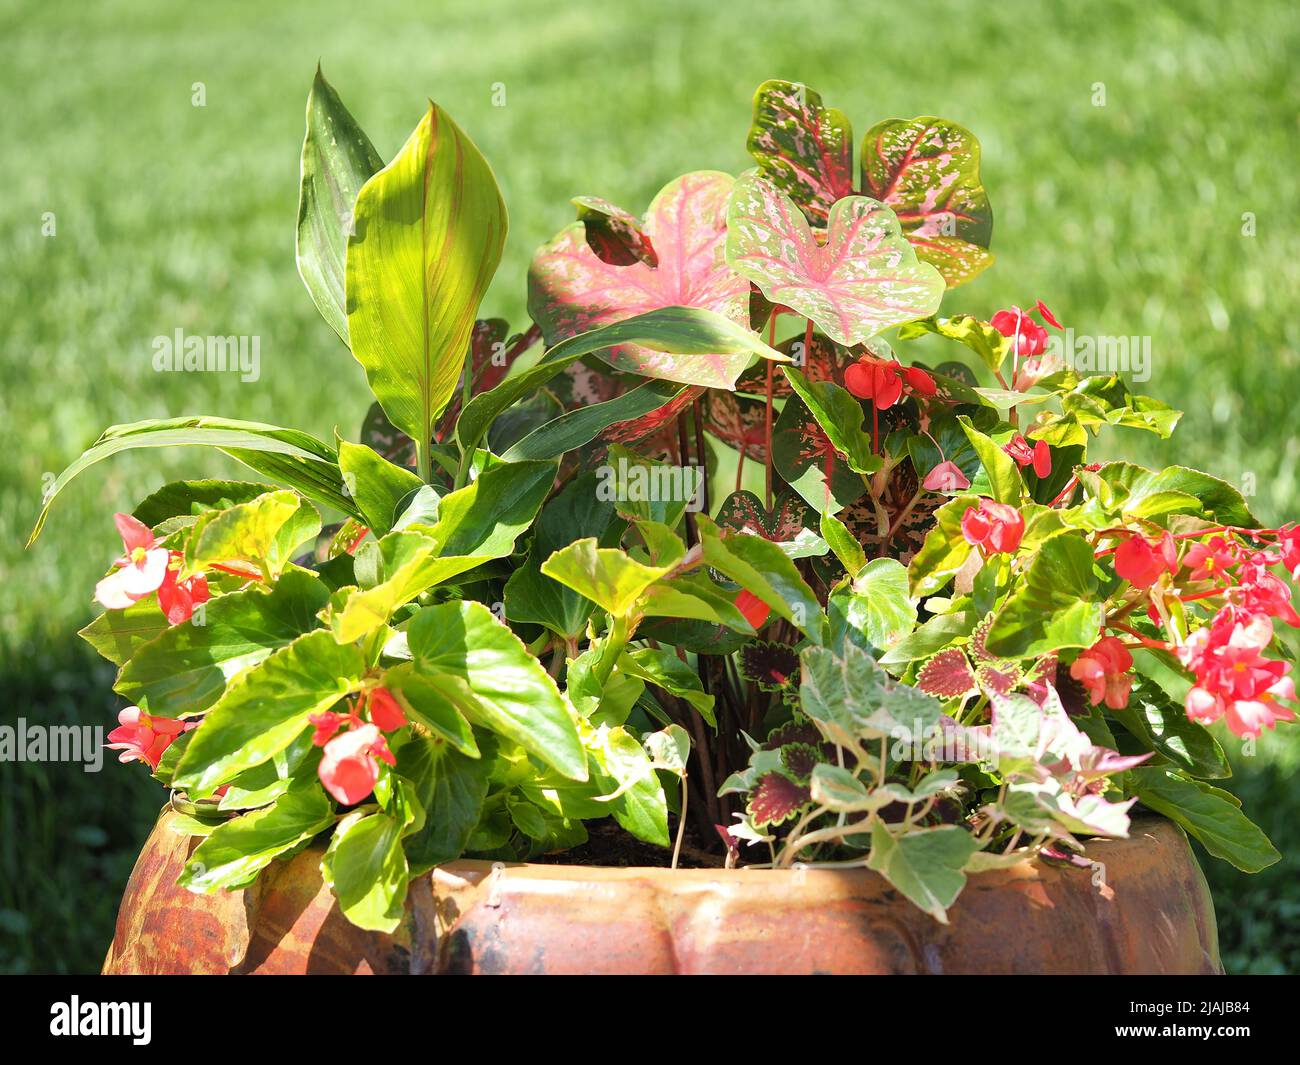 Large flower pot with Hosta's and red flowers Stock Photo